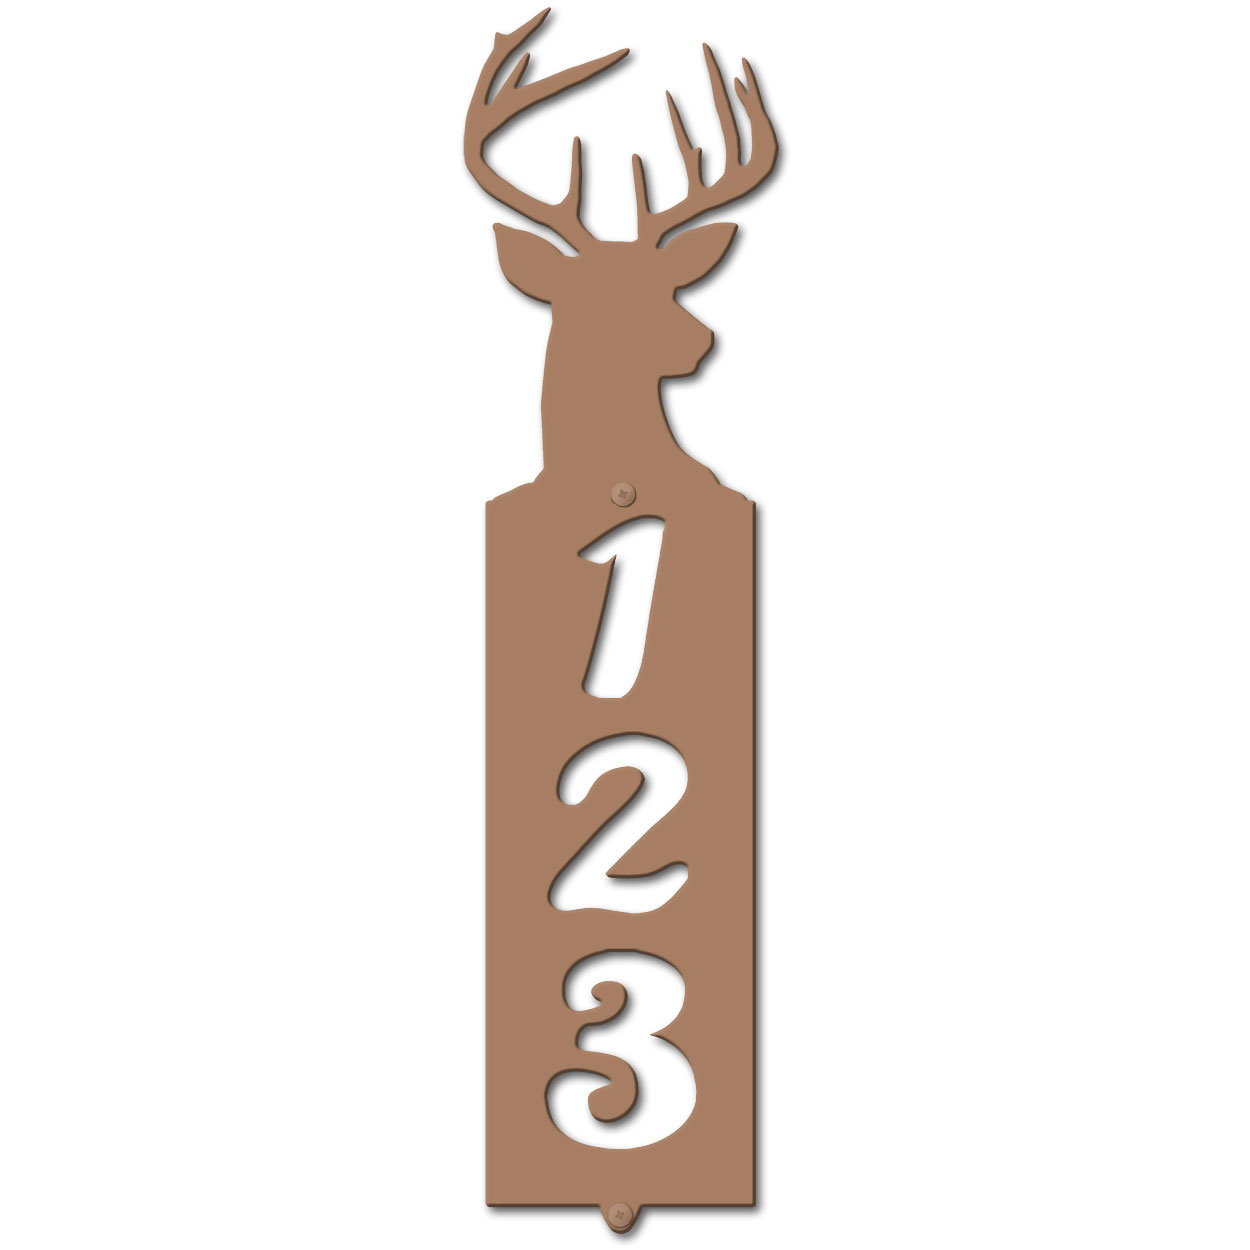 635133 - Deer Bust Cut Outs Three Digit Address Number Plaque